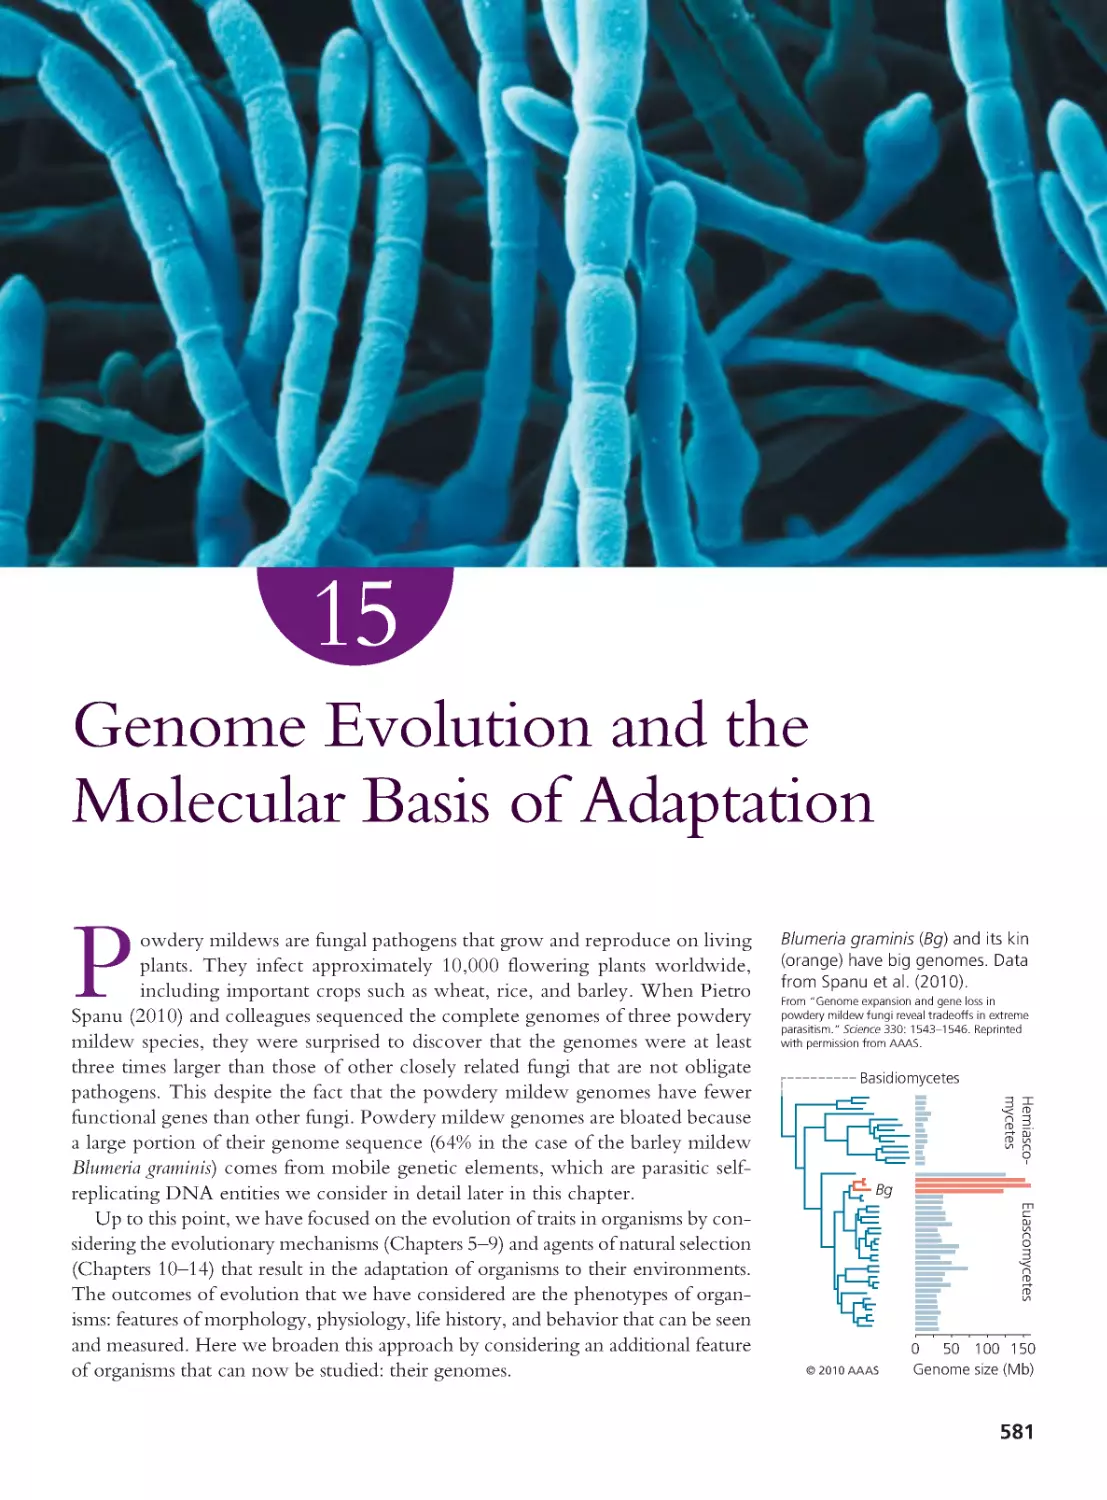 CHAPTER 15 Genome Evolution and the Molecular Basis of Adaptation